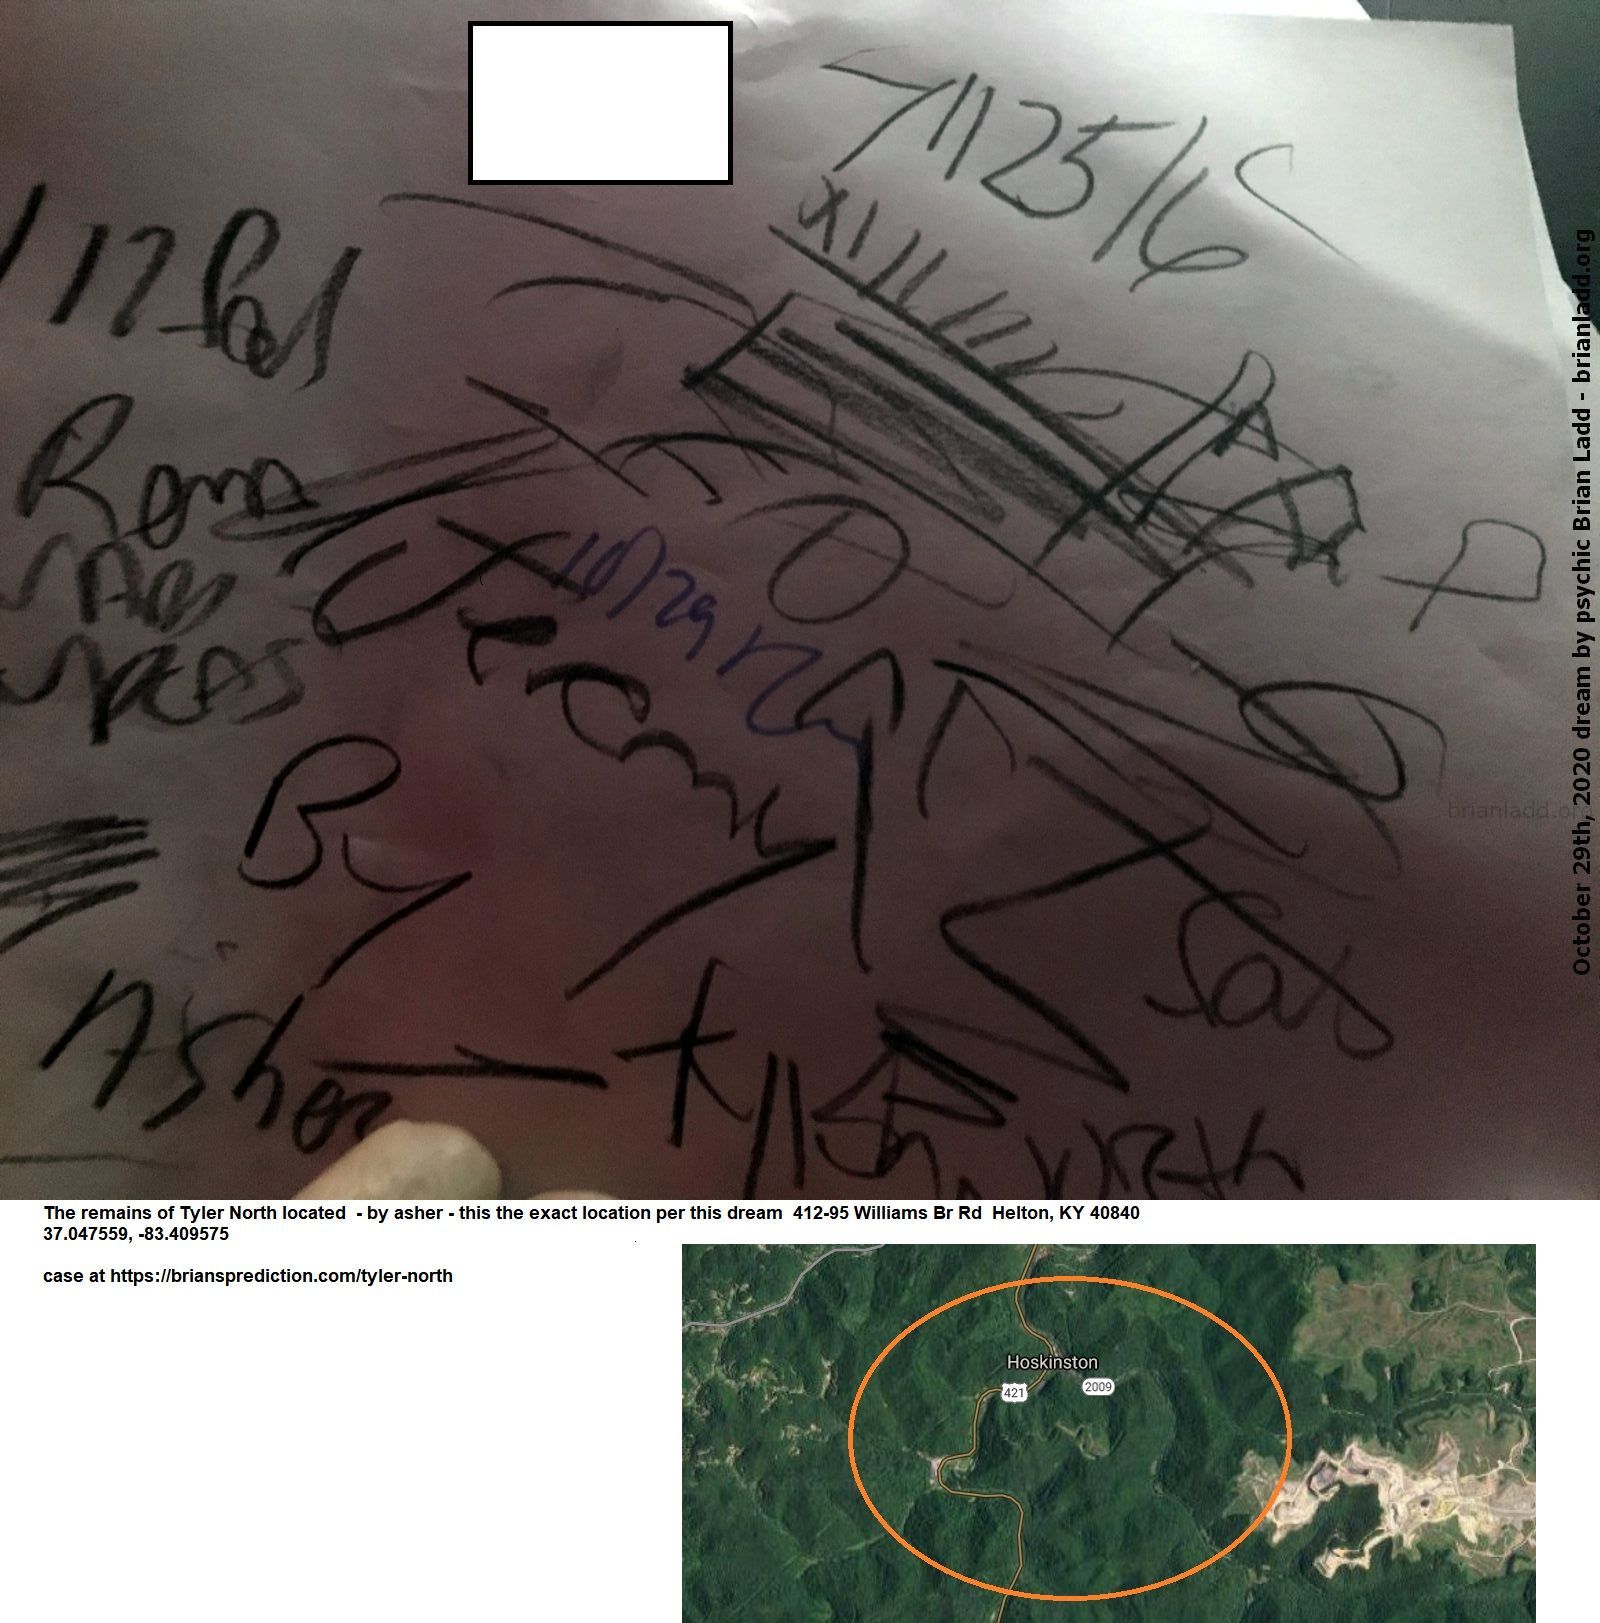 13946 29 October 2020 4 - The Remains Of Tyler North Located  - By Asher - This The Exact Location Per This Dream  412-9...
The Remains Of Tyler North Located  - By Asher - This The Exact Location Per This Dream  412-95 Williams Br Rd  Helton, Ky 40840  37.047559, -83.409575  Case At   https://briansprediction.com/Tyler-North
